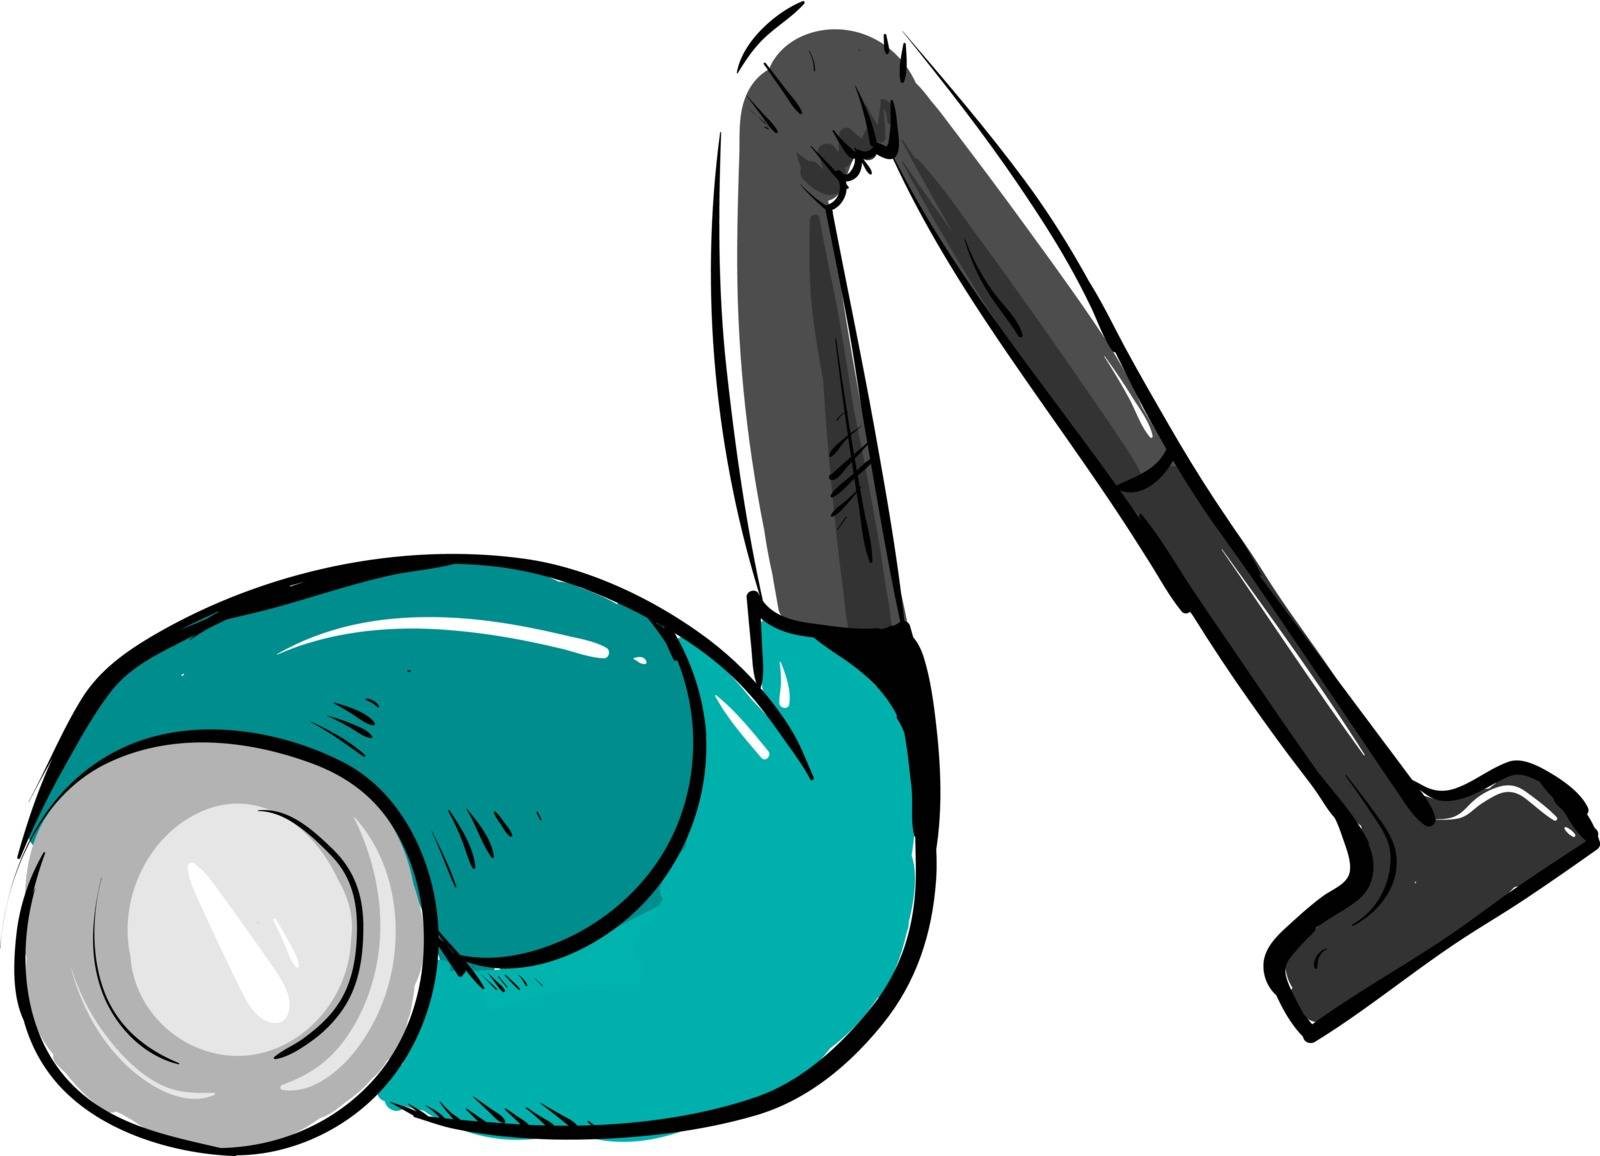 Vaccum cleaner, illustration, vector on white background.